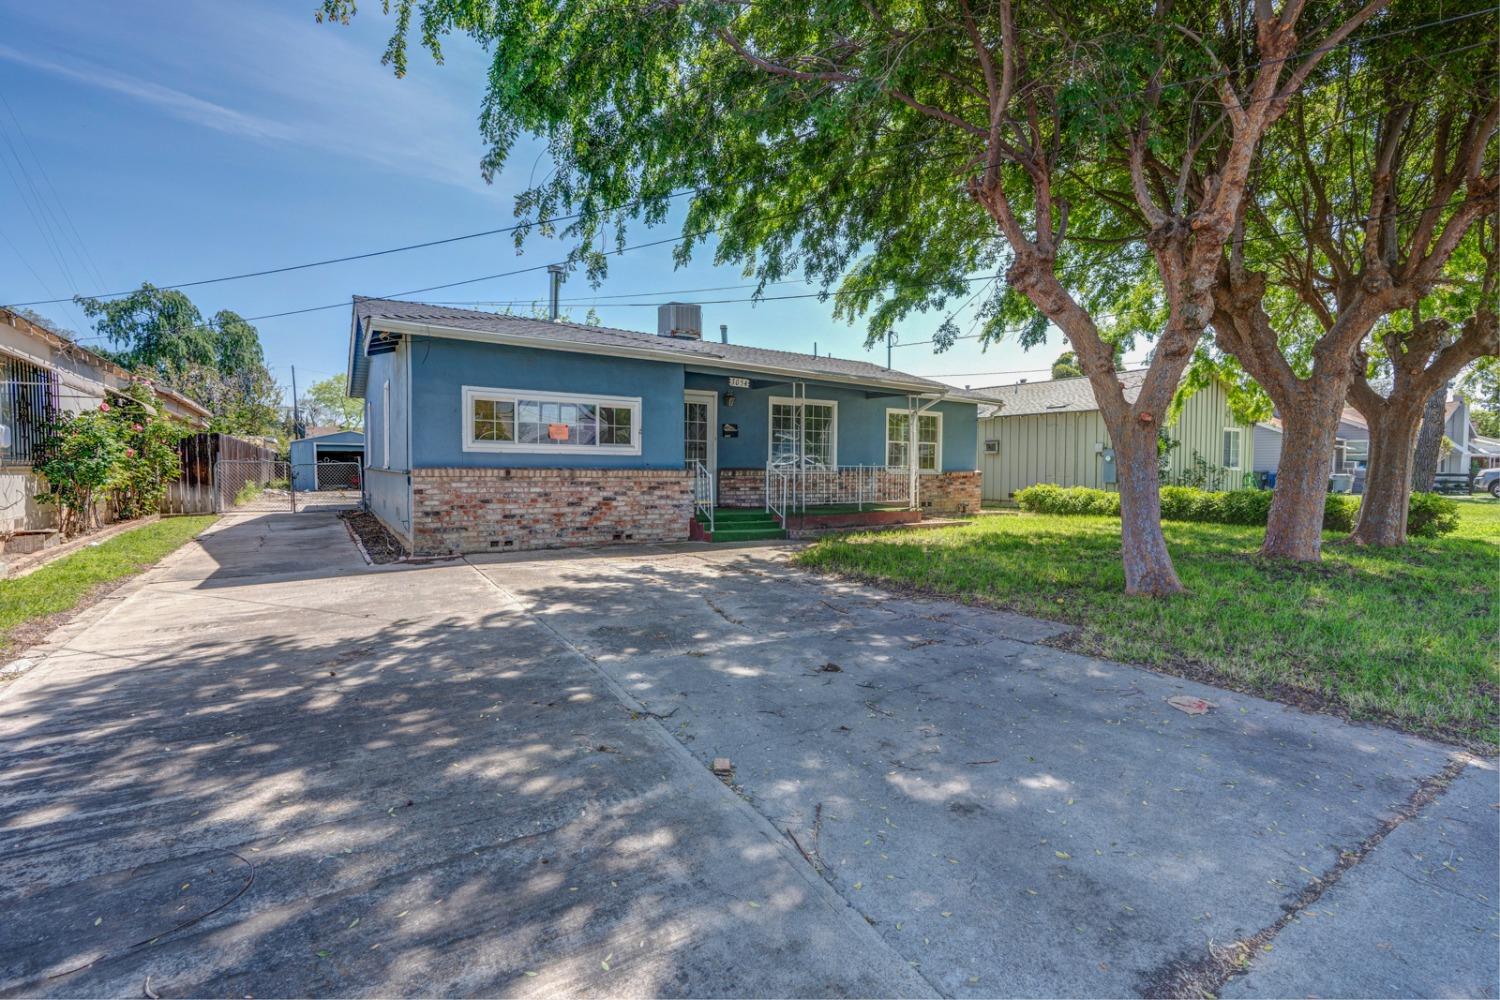 Photo of 3054 Oleander Ave in Merced, CA